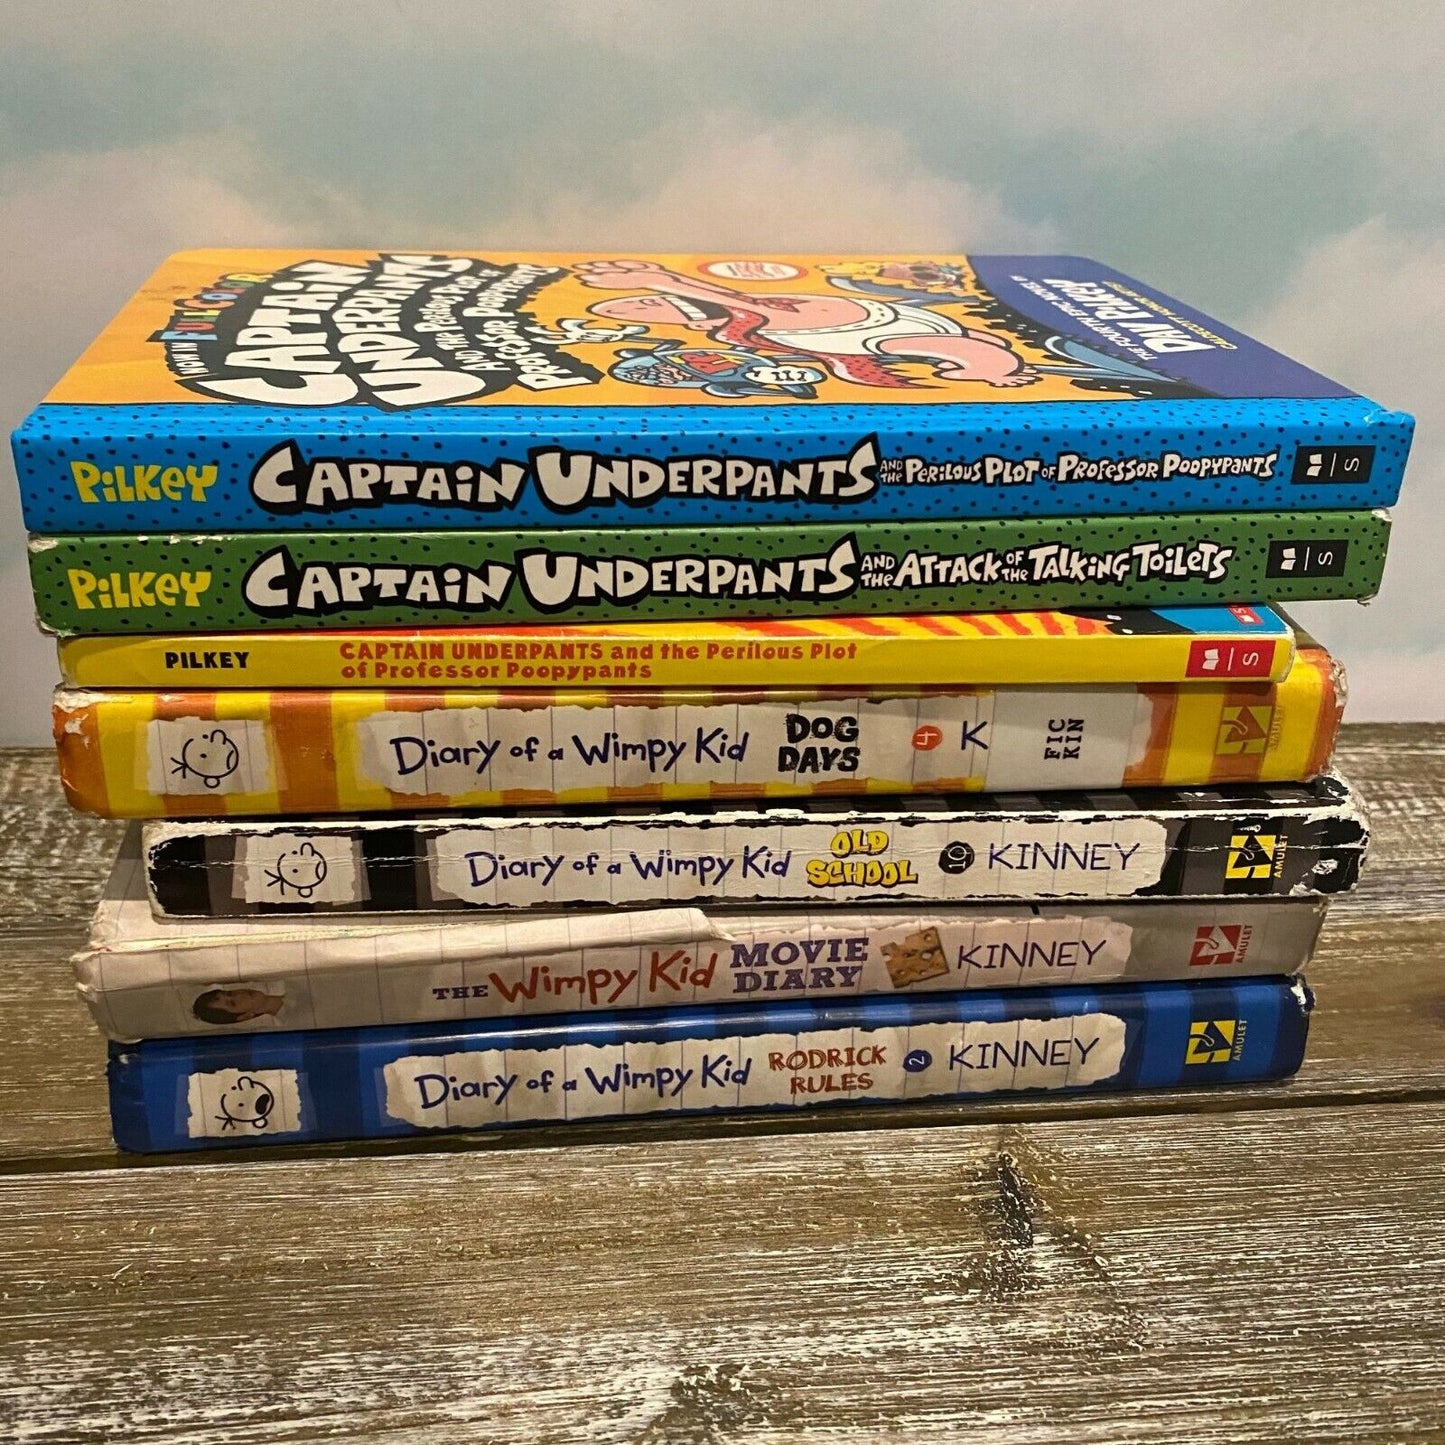 9x Book Lot Diary Of A Wimpy Kid & Captain Underpants by Jeff Kinney Dav Pilkey